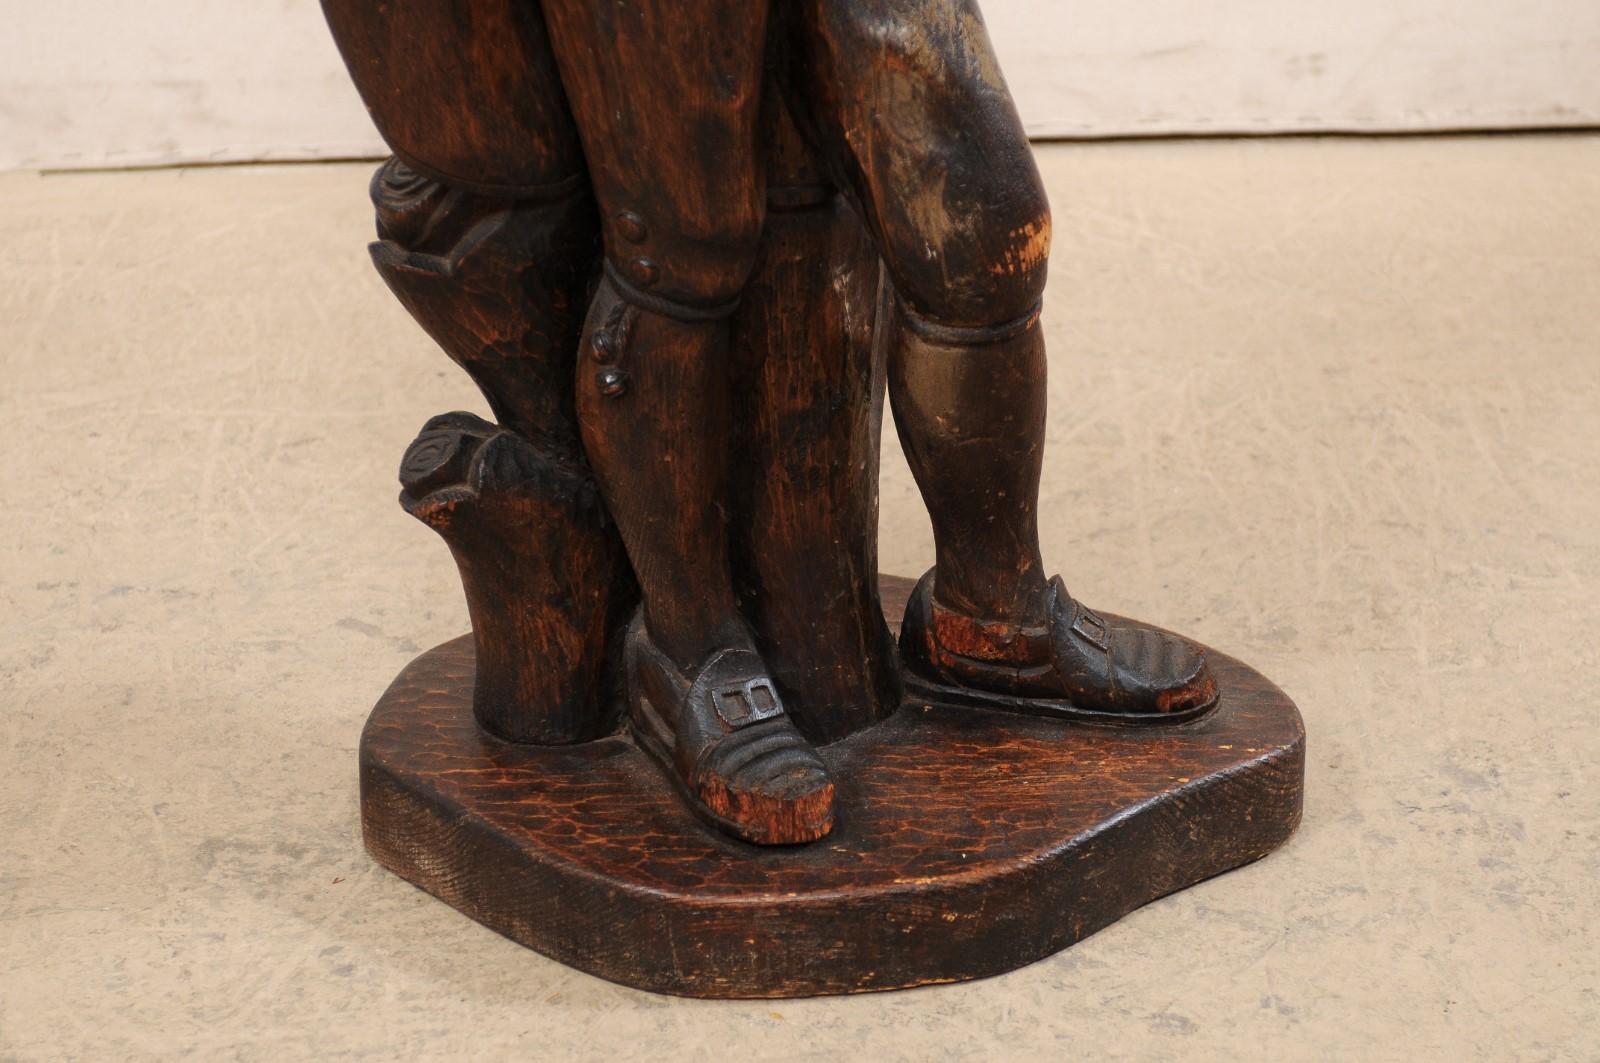 Italian Carved-Wood Statue of Male Figure holding a Basket, Mid 20th In Good Condition For Sale In Atlanta, GA